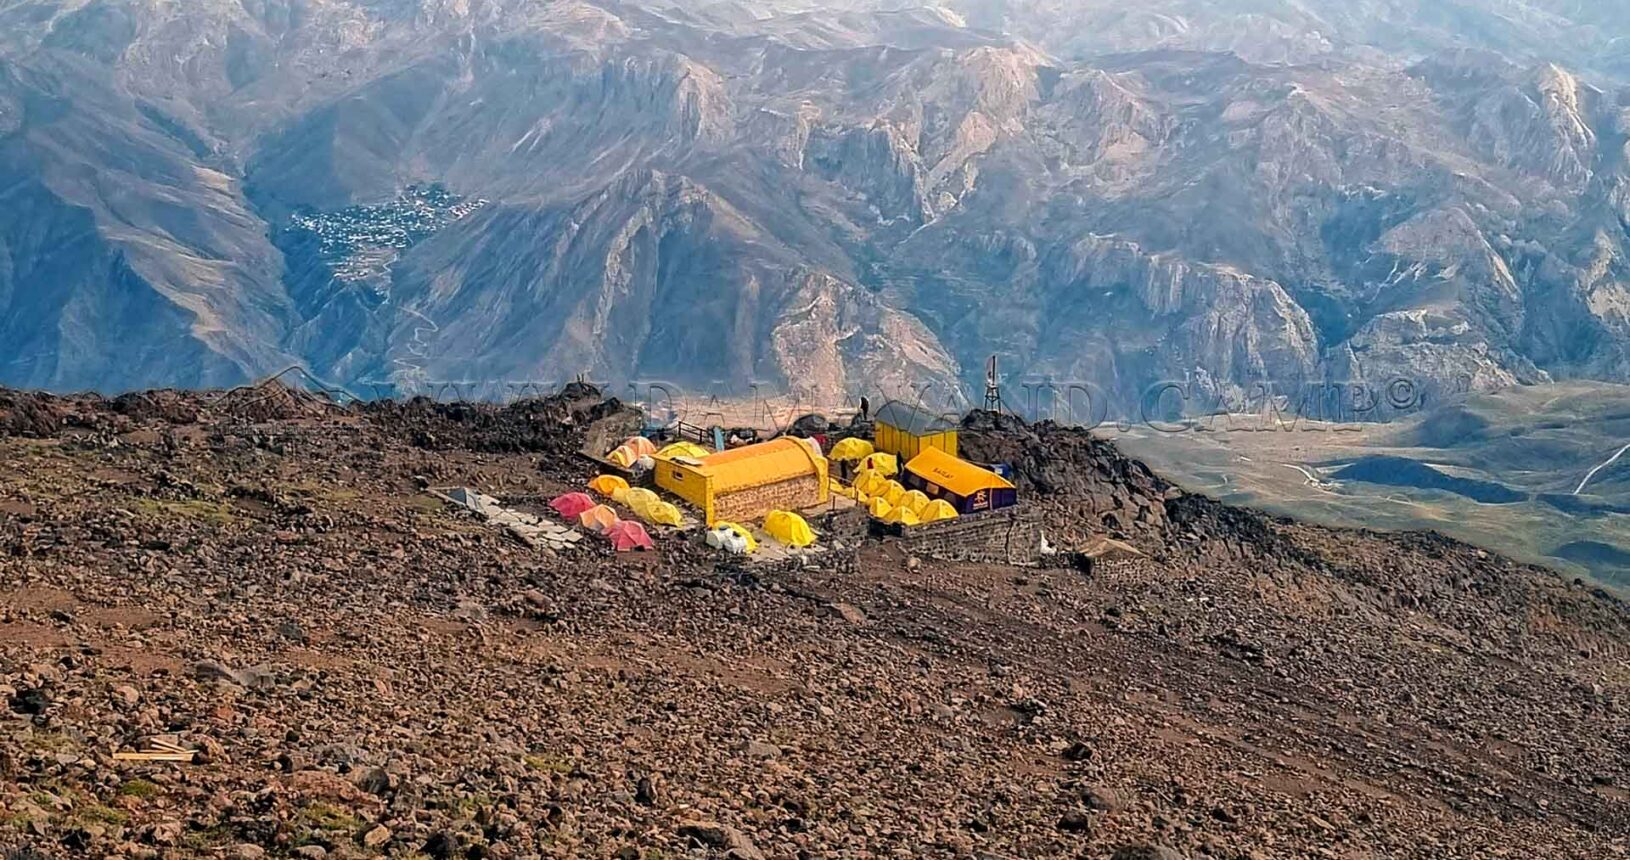 View from higher altitudes: The old hut and tents of the Mount Damavand Group at Camp 3 on Mount Damavand.